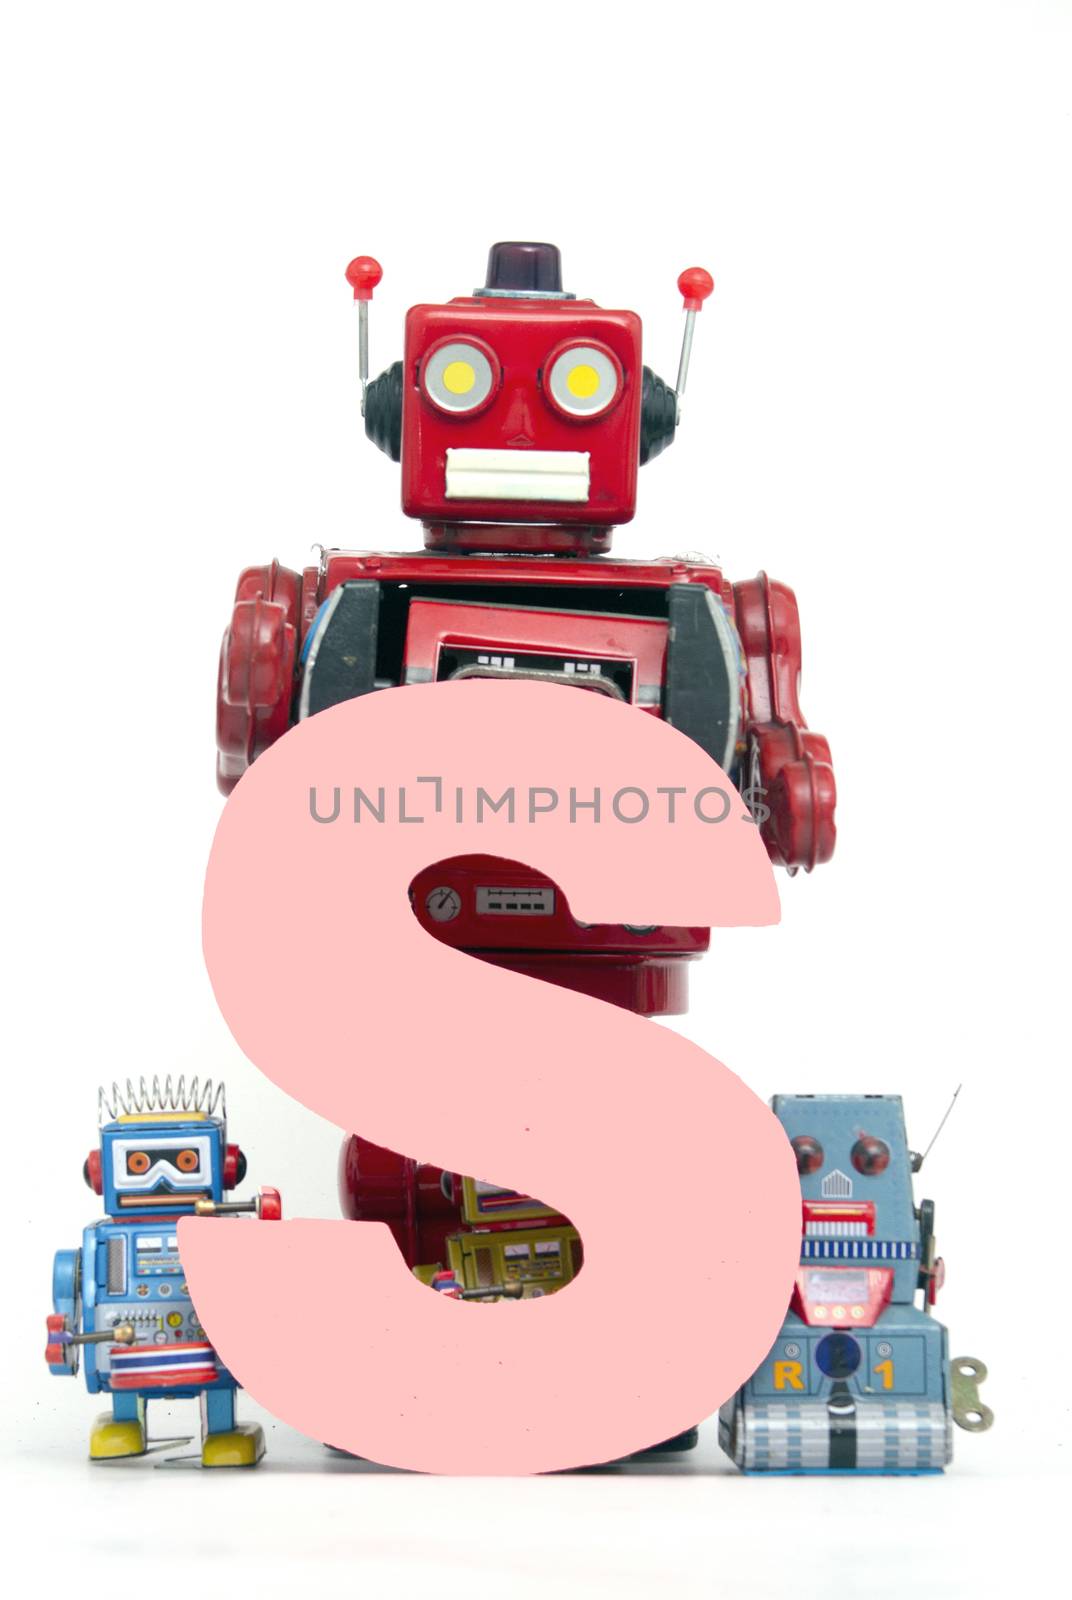 capital letter S held by vintage robot toys 